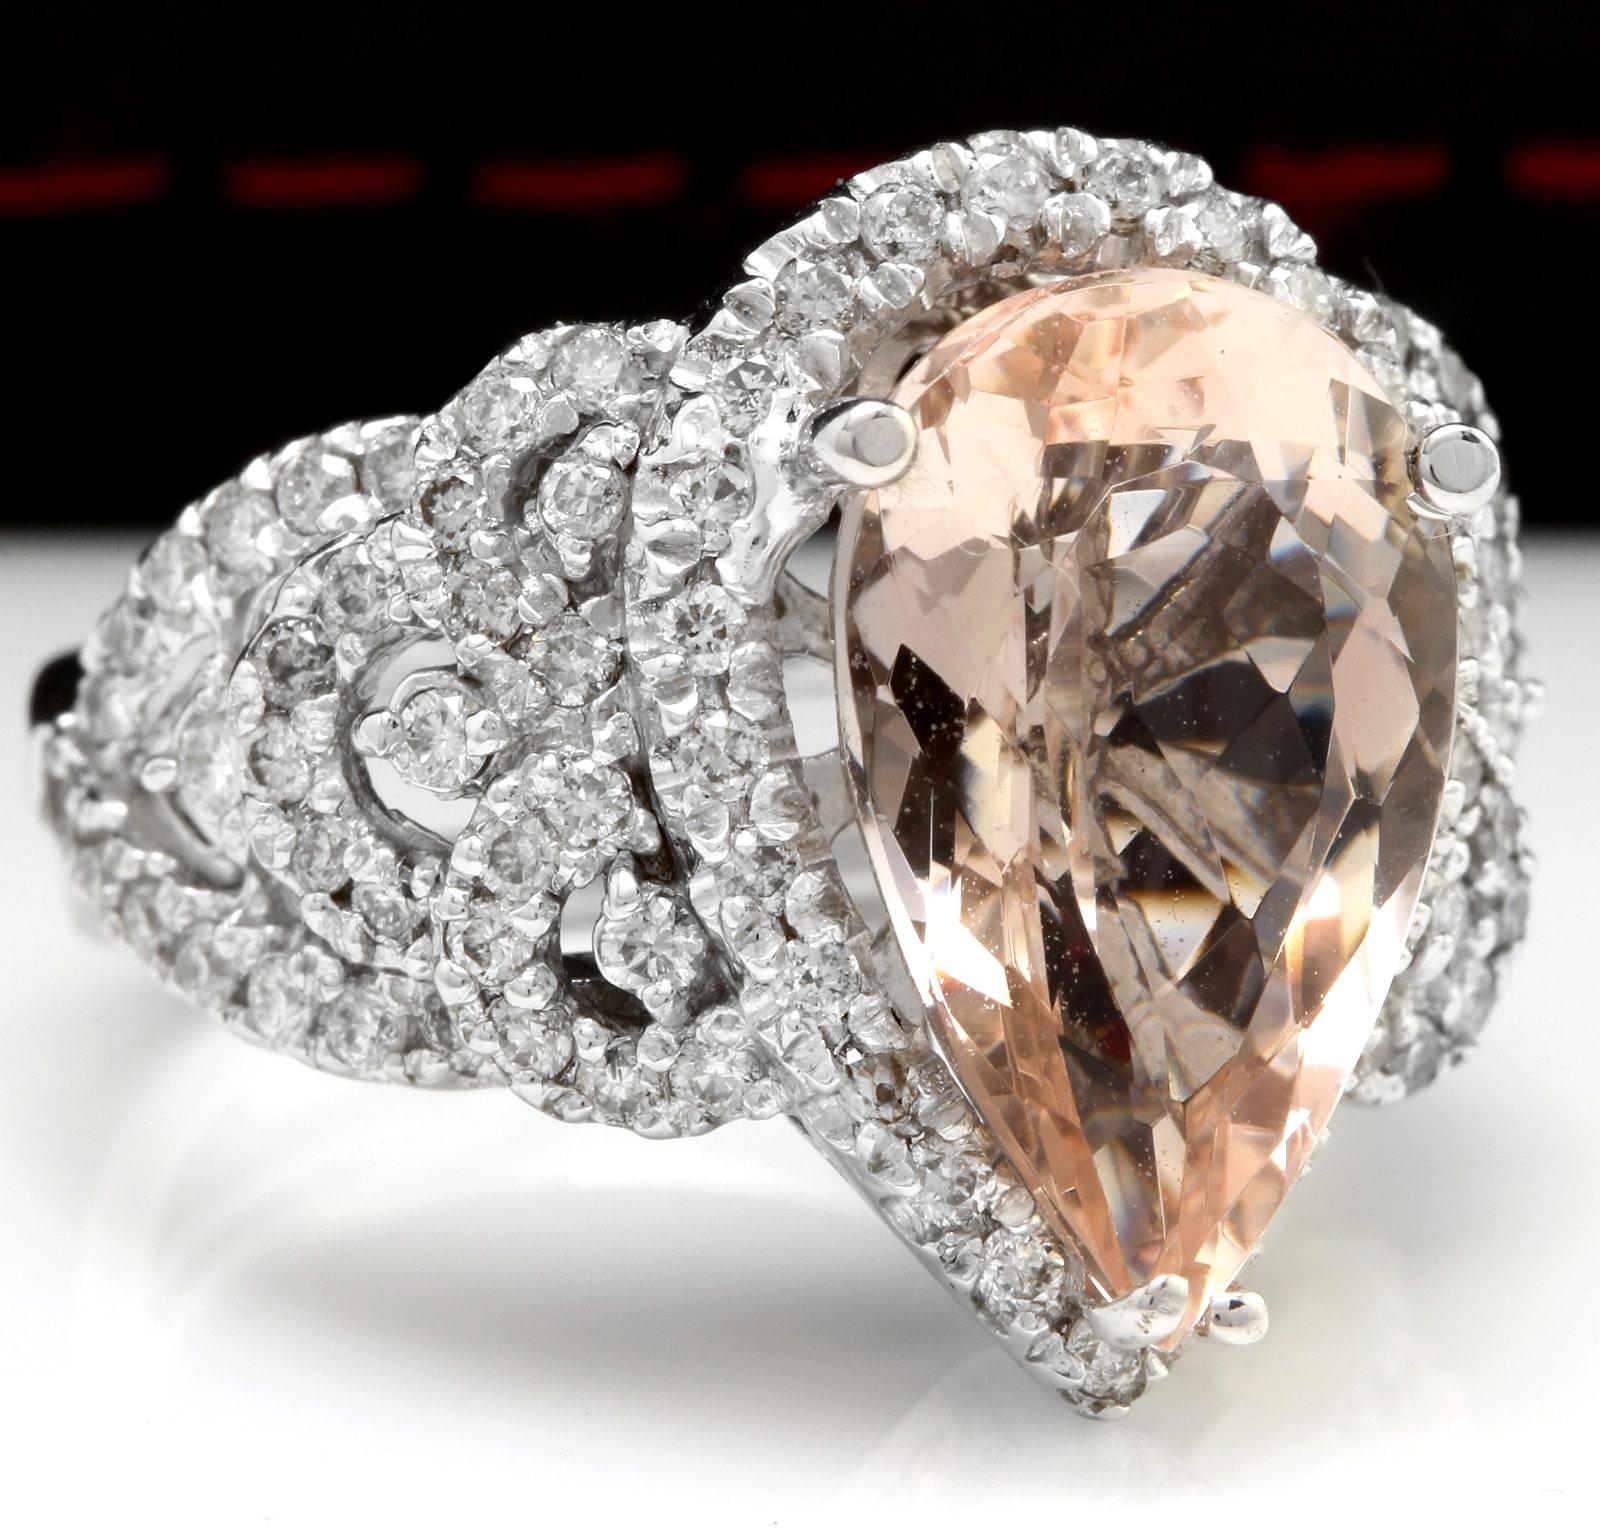 8.50 Carats Exquisite Natural Morganite and Diamond 14K Solid White Gold Ring

Suggested Replacement Value: 8,500.00

Total Natural Morganite Weight is: Approx. 6.50 Carats 

Morganite Measures: Approx. 15.29 x 7.90mm

Natural Round Diamonds Weight: